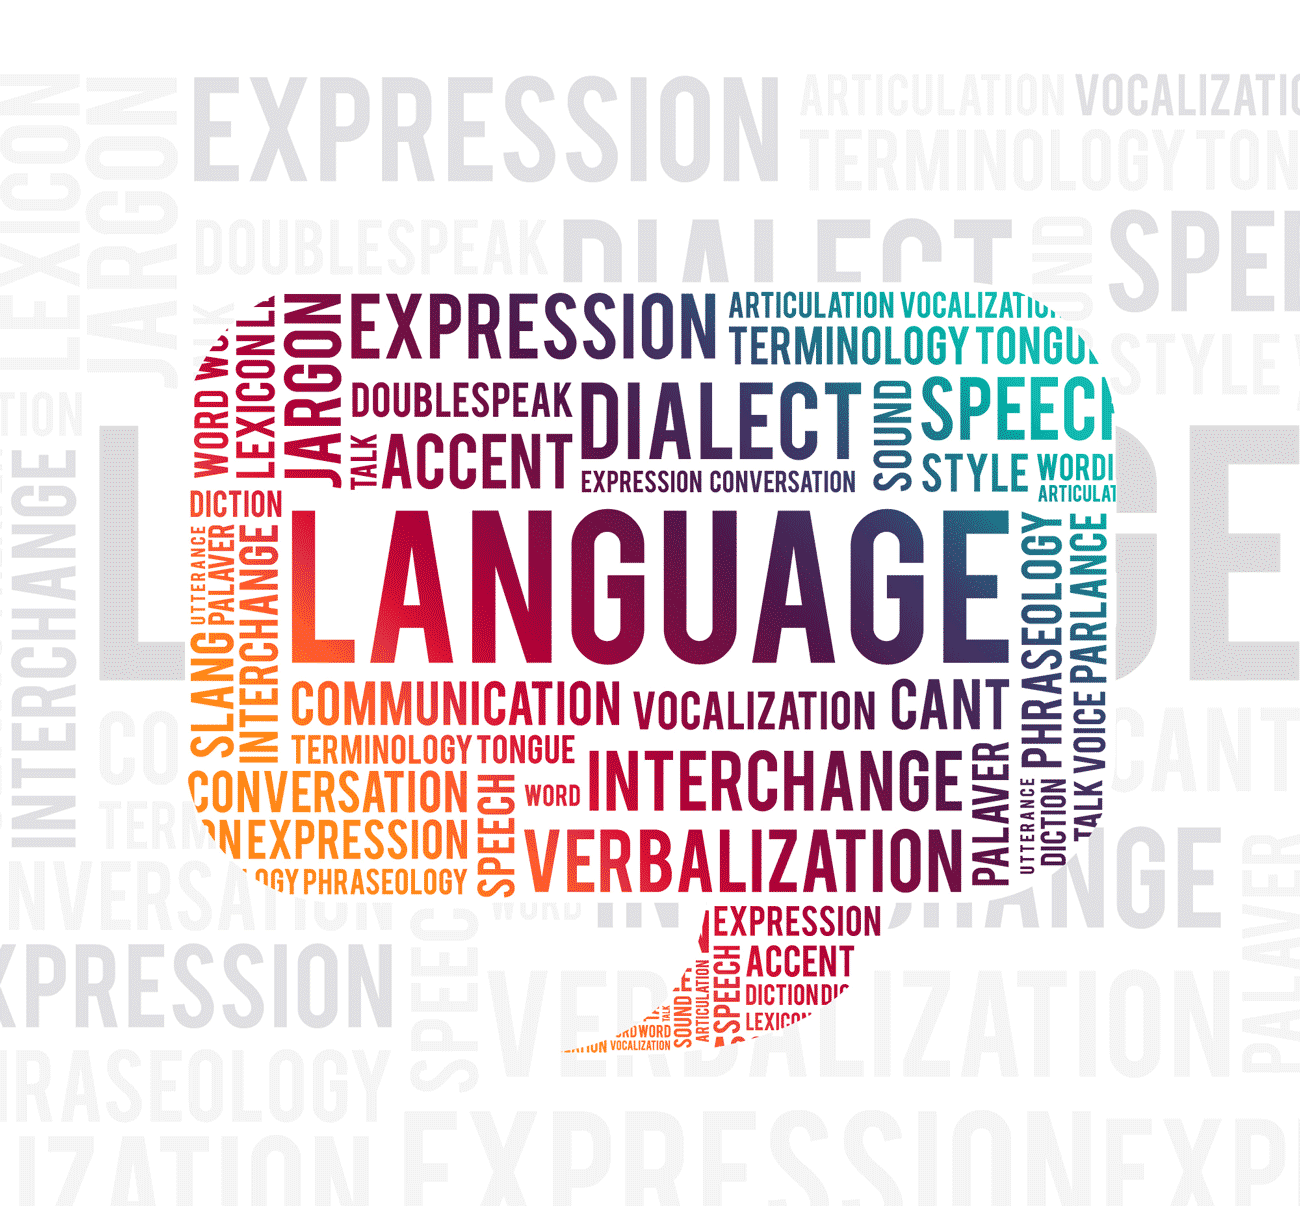 Can-AI-Stop-the-Erosion-of-7,000-Human-Languages-DataEthics4All-AI-DIET-Magazine-Vol1